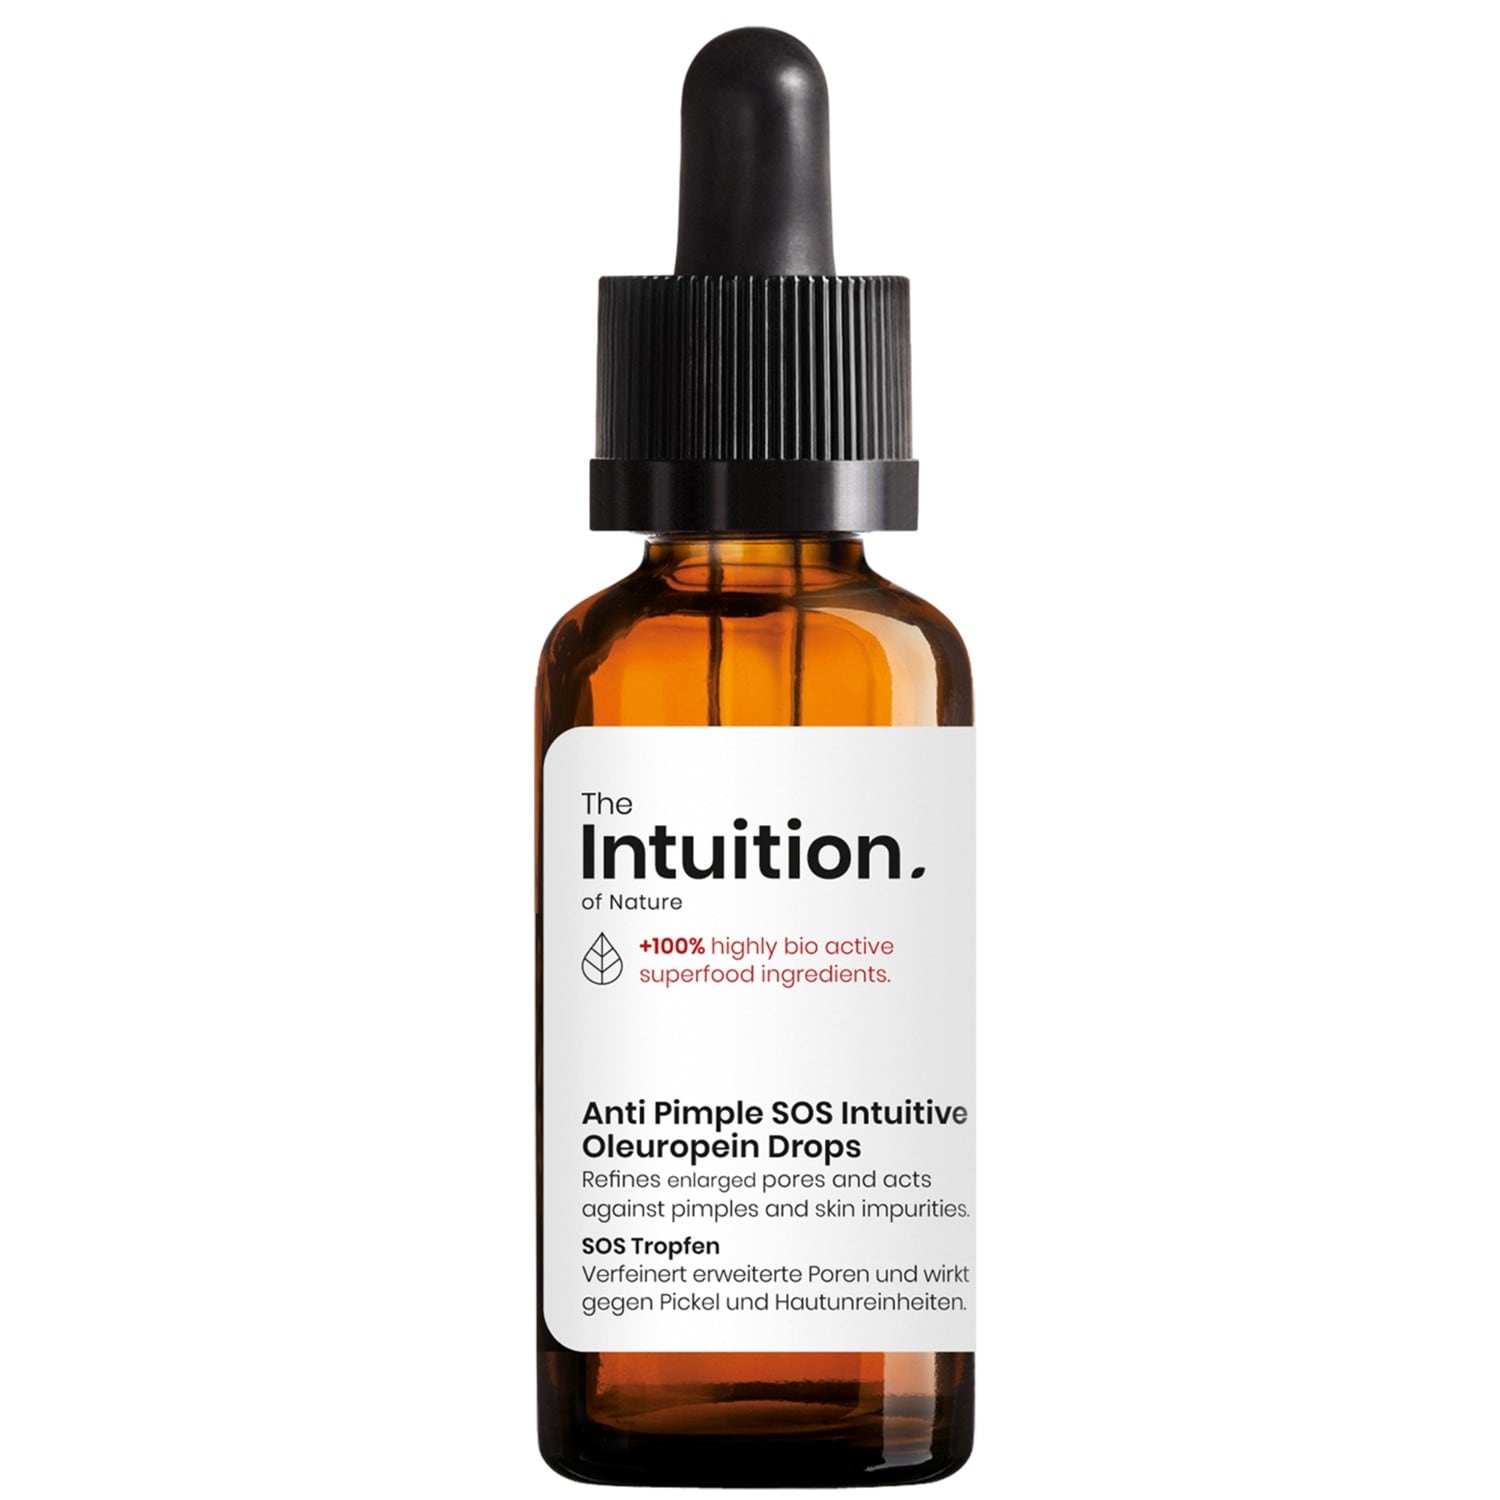 The Intuition Of Nature Anti Pimple SOS Intuitive Oleuropein Drops